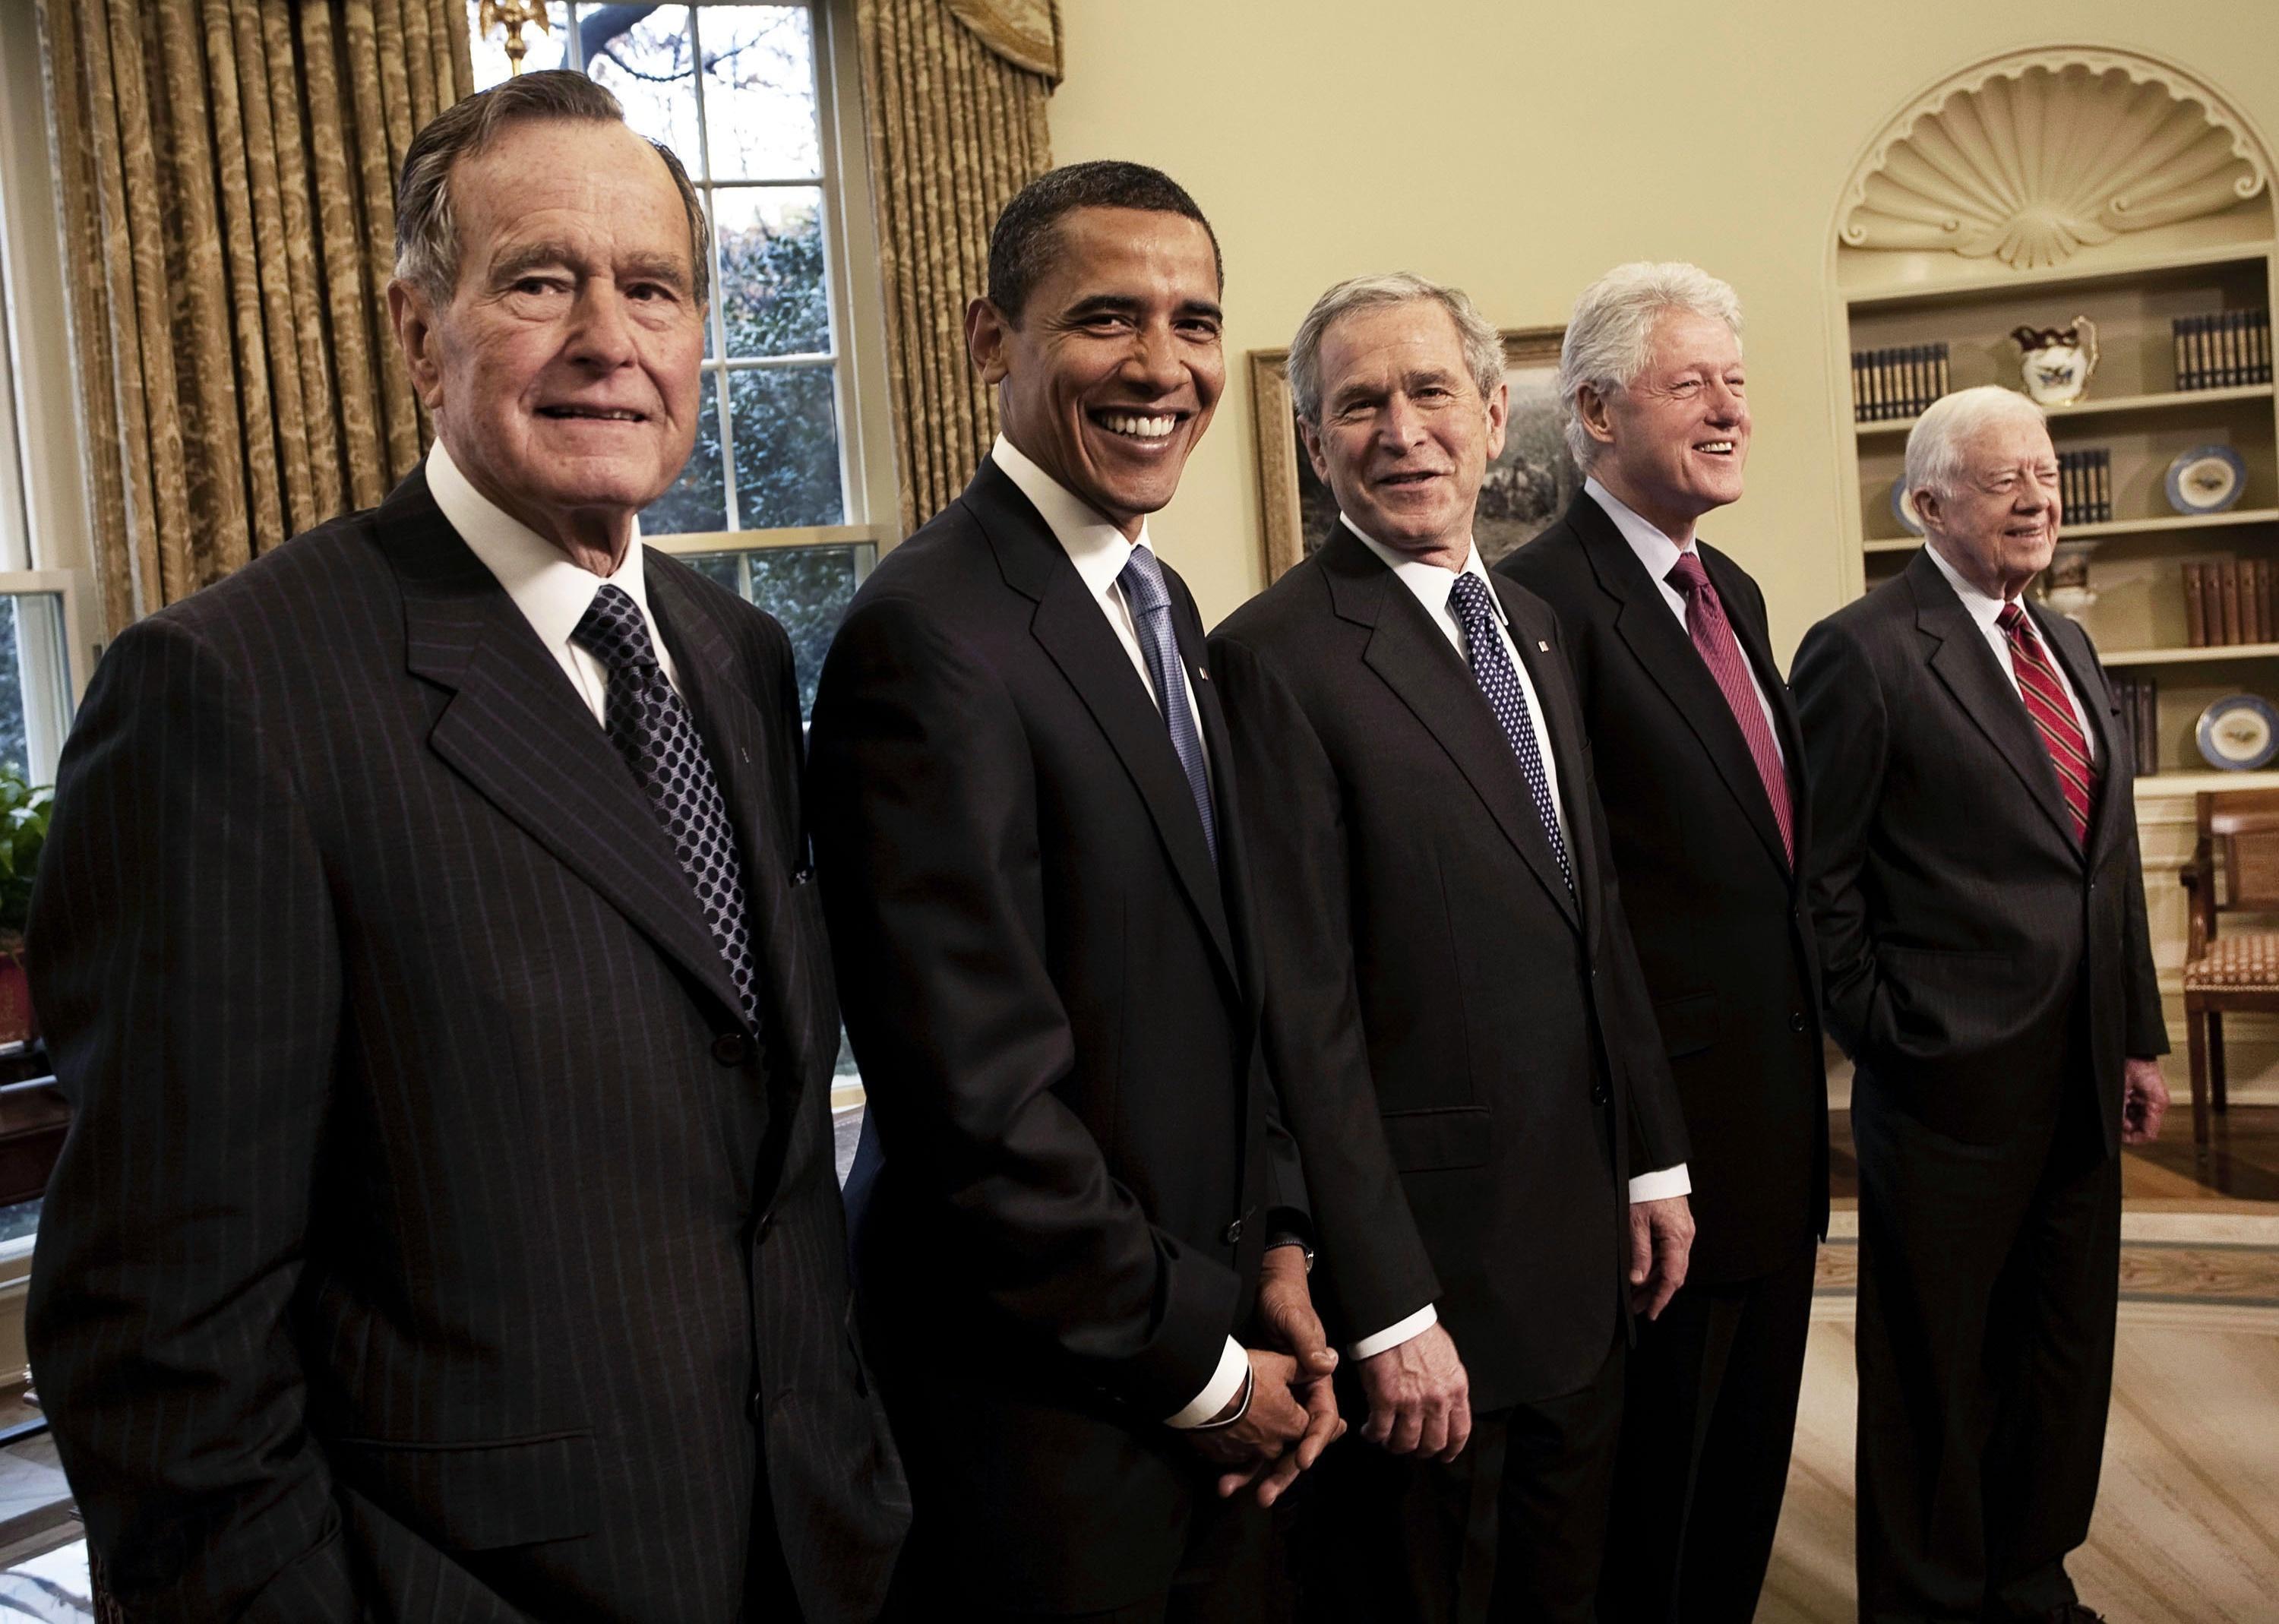 George Bush, Barack Obama, George W. Bush, Bill Clinton and Jimmy Carter standing in a line in the Oval Office at the White House.